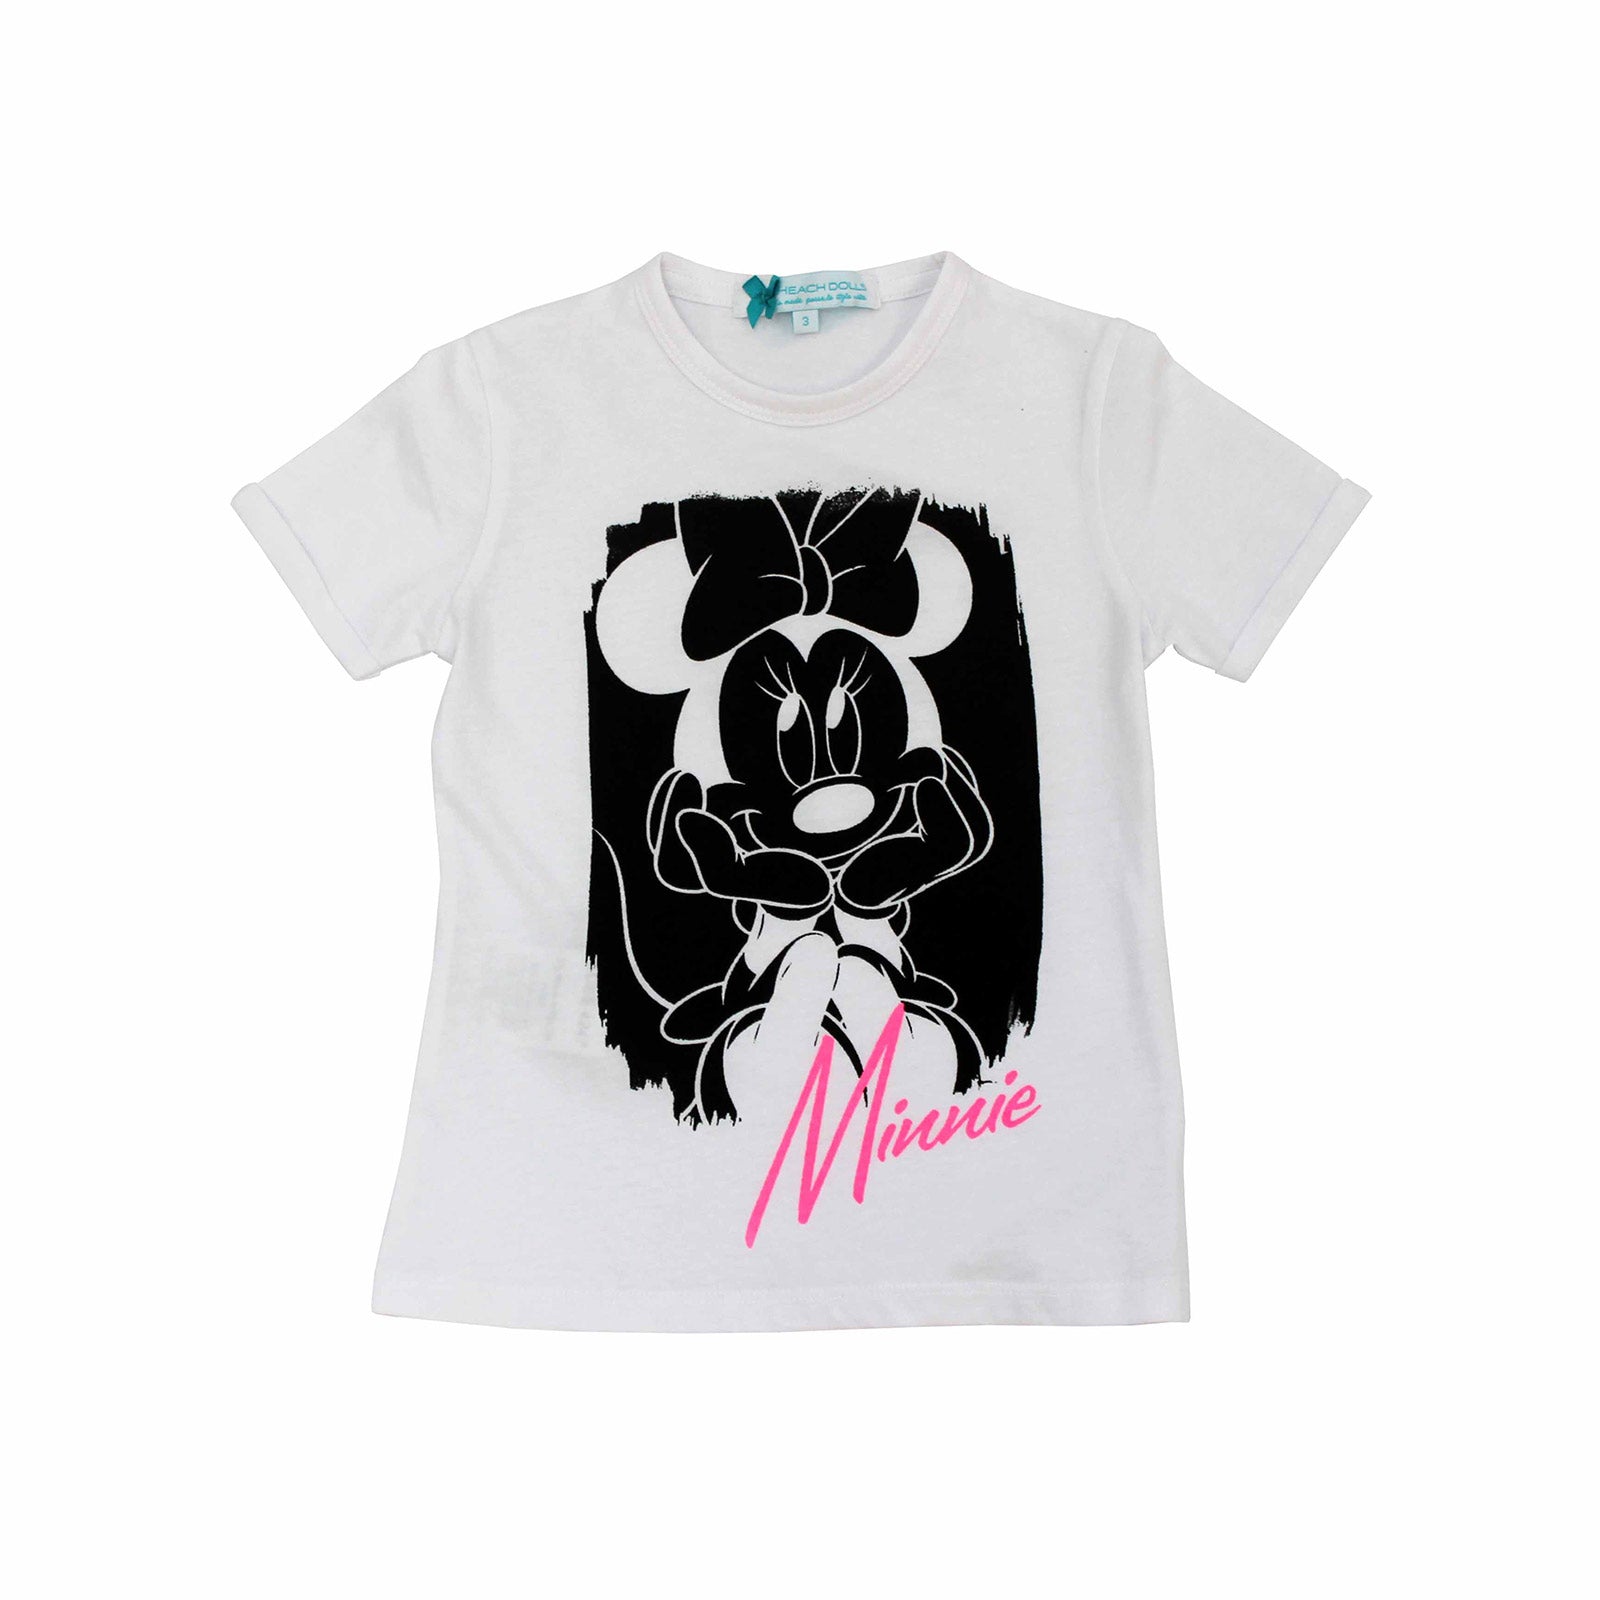 
  Short-sleeved T-shirt from the Silvian Heach girl's clothing line with Minnie print on the fro...